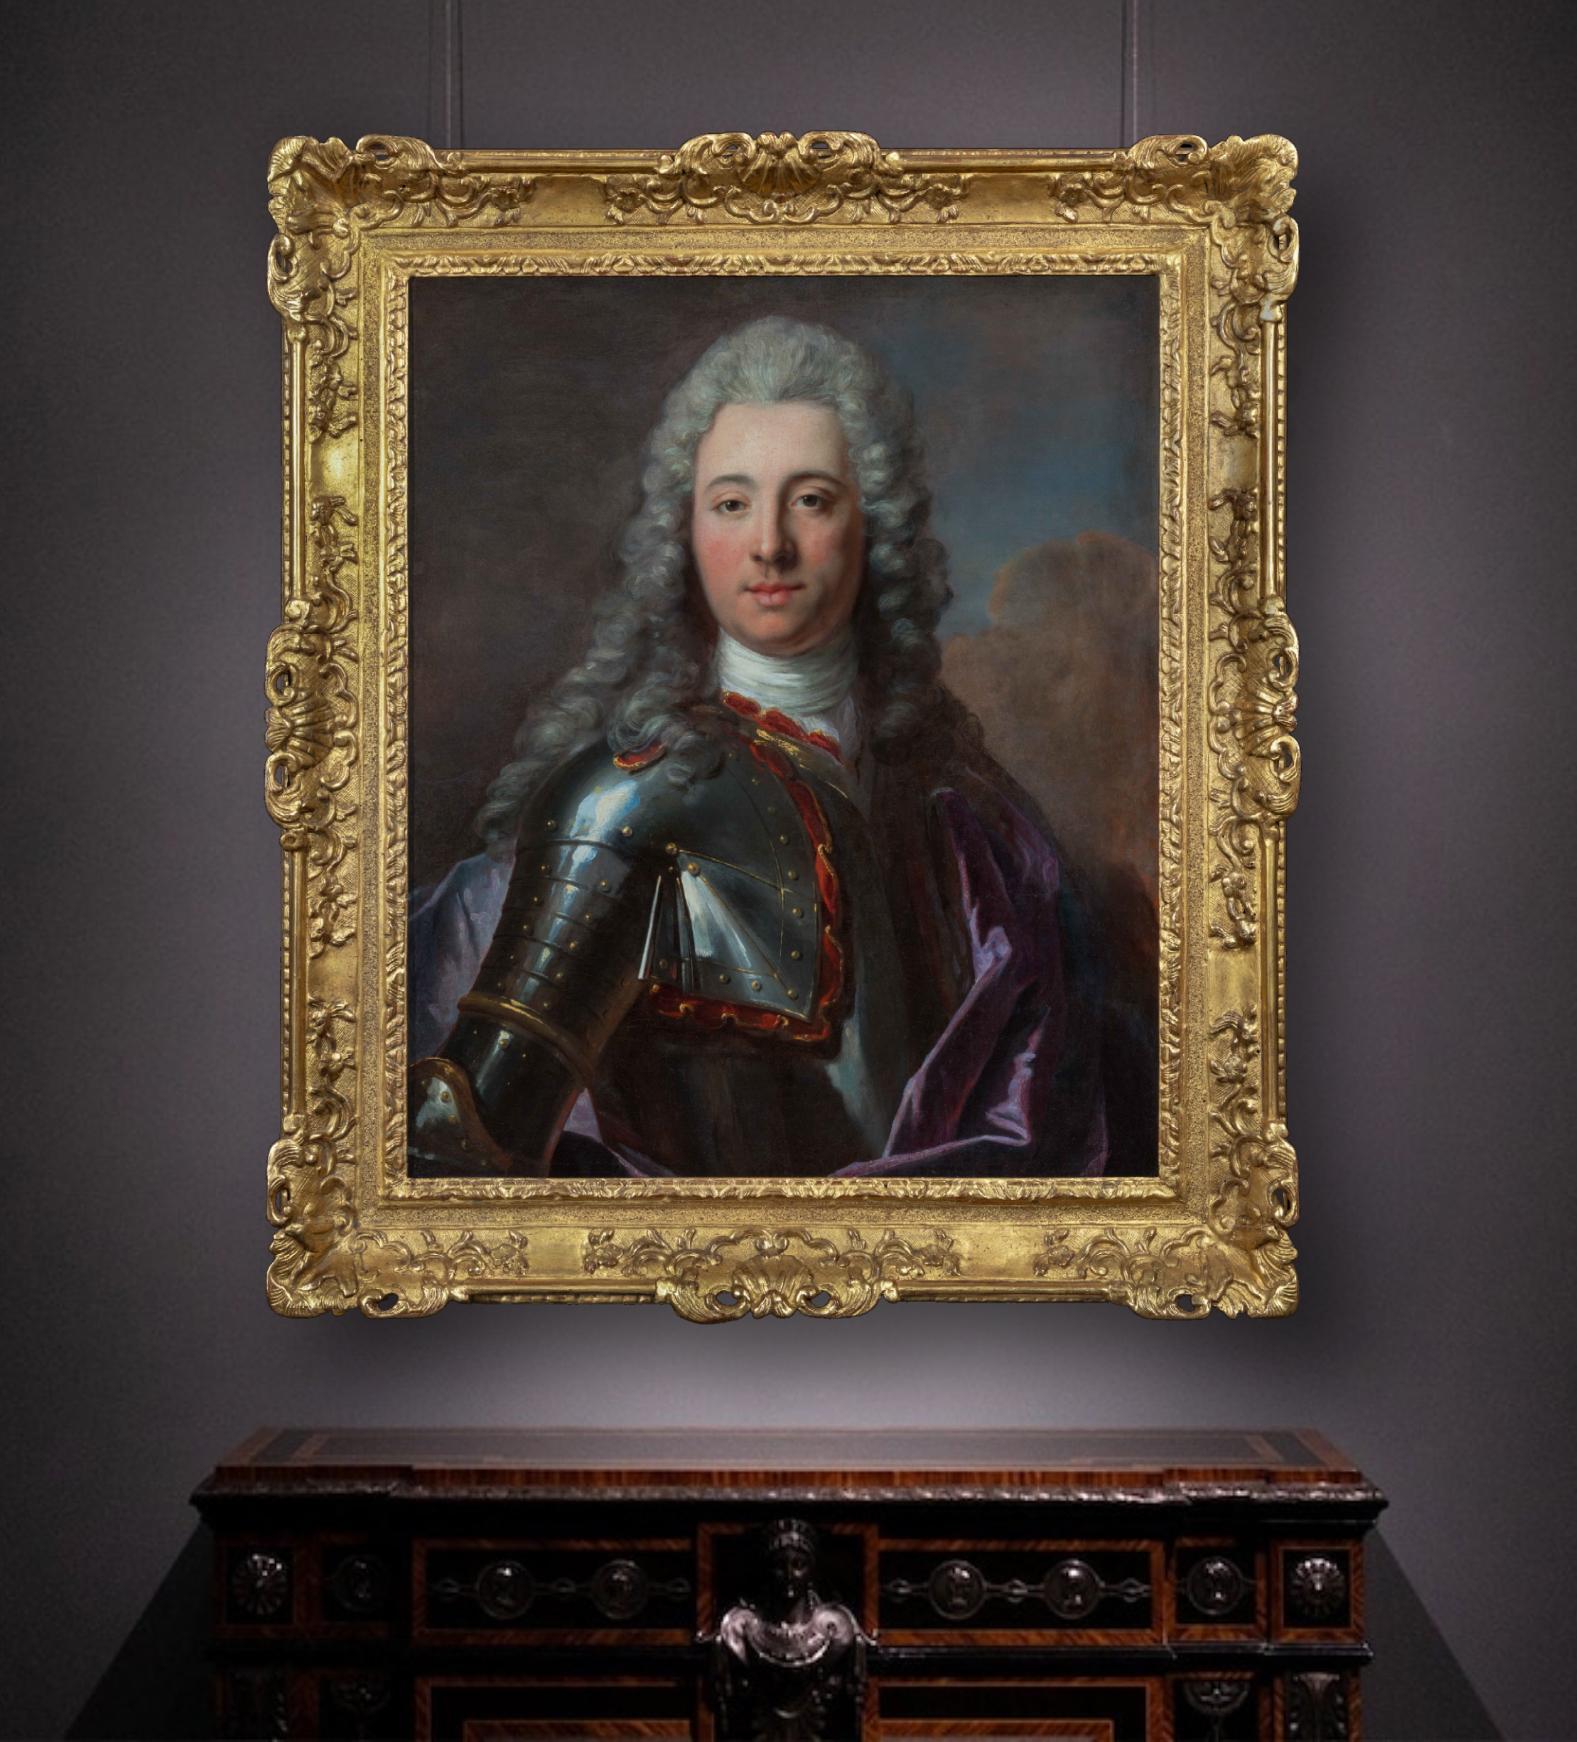 The sitter in this superb portrait, presented by Titan Fine Art, is shown with the grandiloquence characteristic of the eighteenth-century French school of painting.  The young nobleman has been portrayed wearing an ingeniously embellished French